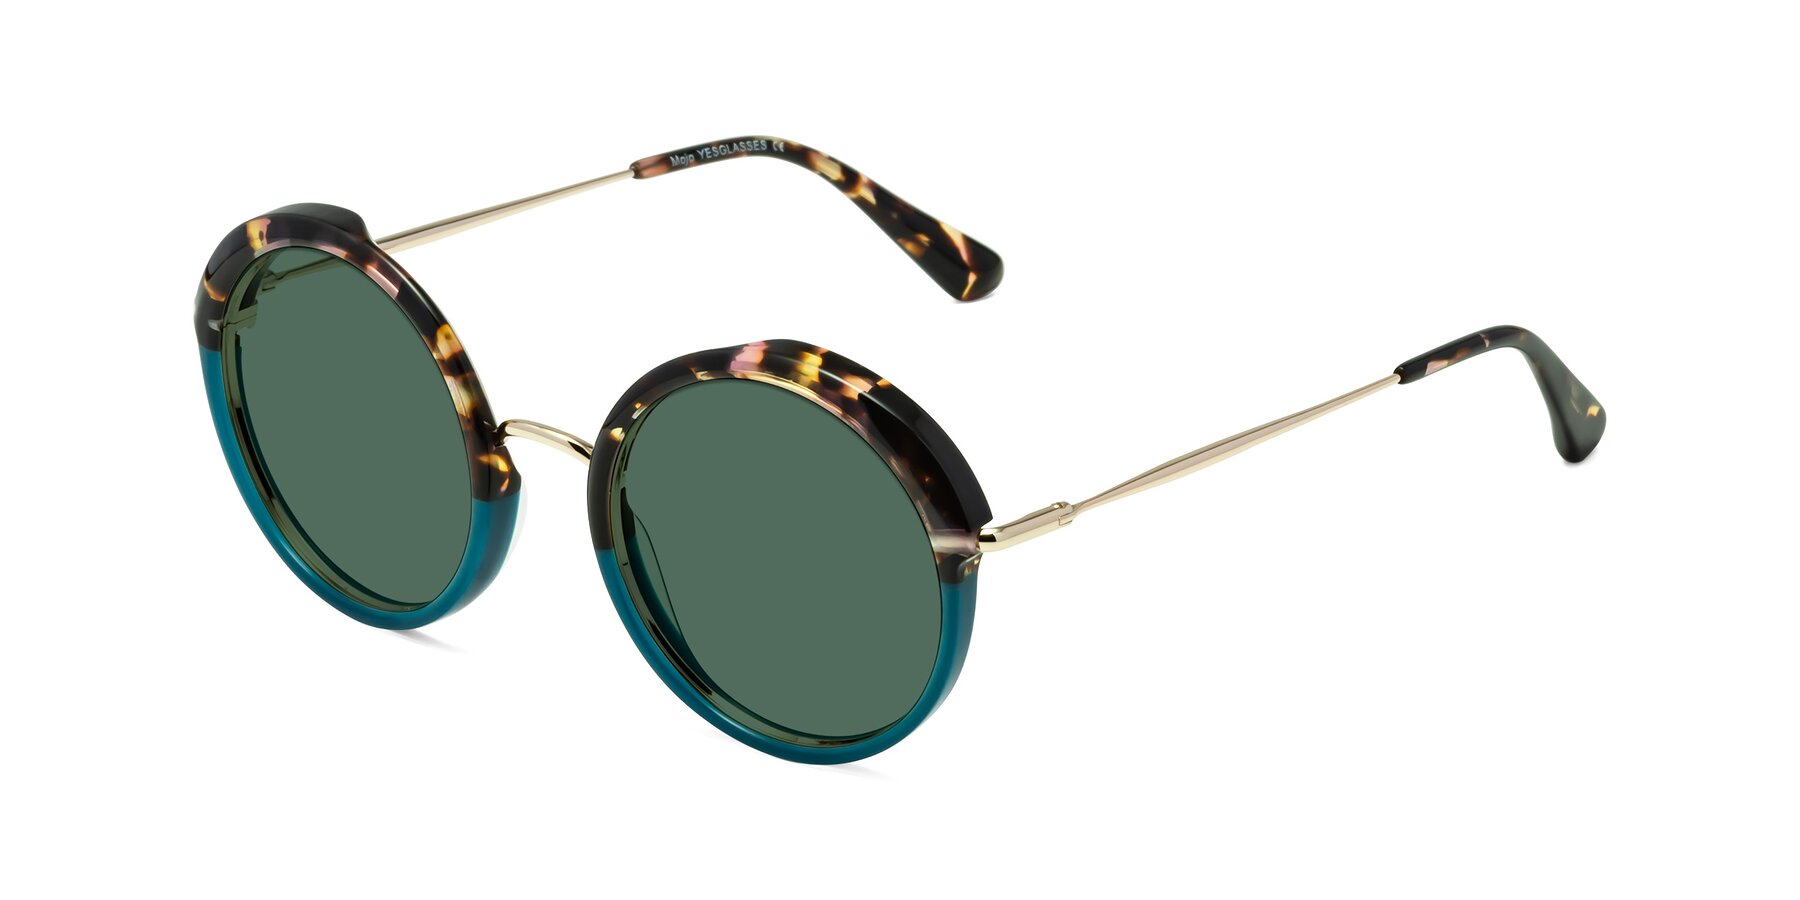 Angle of Mojo in Floral-Teal with Green Polarized Lenses